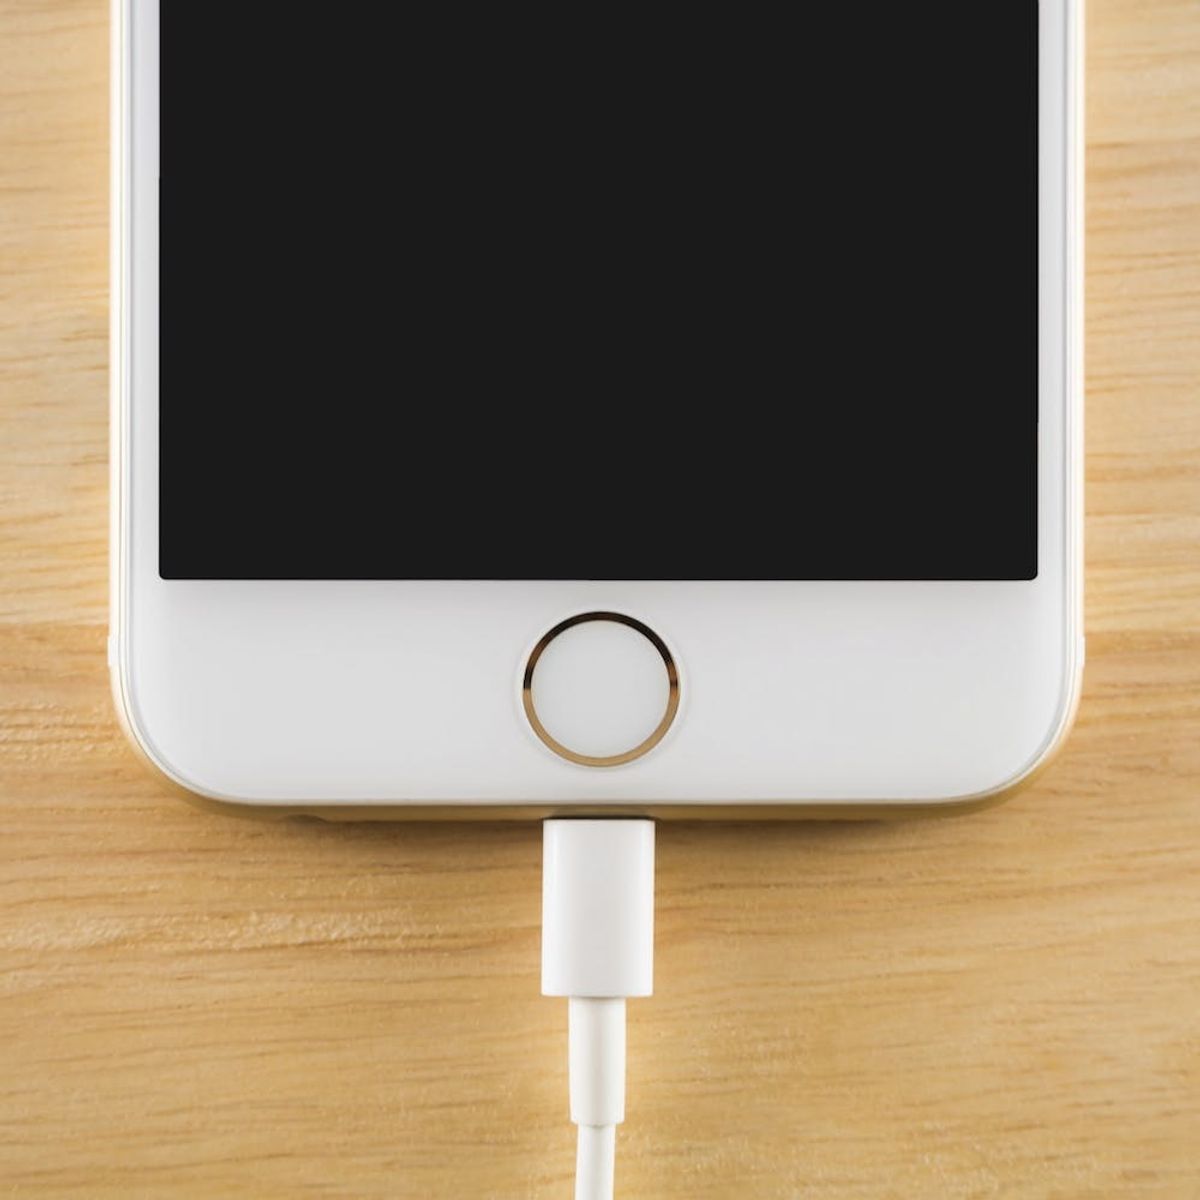 Your iPhone Could Charge from Across the Room